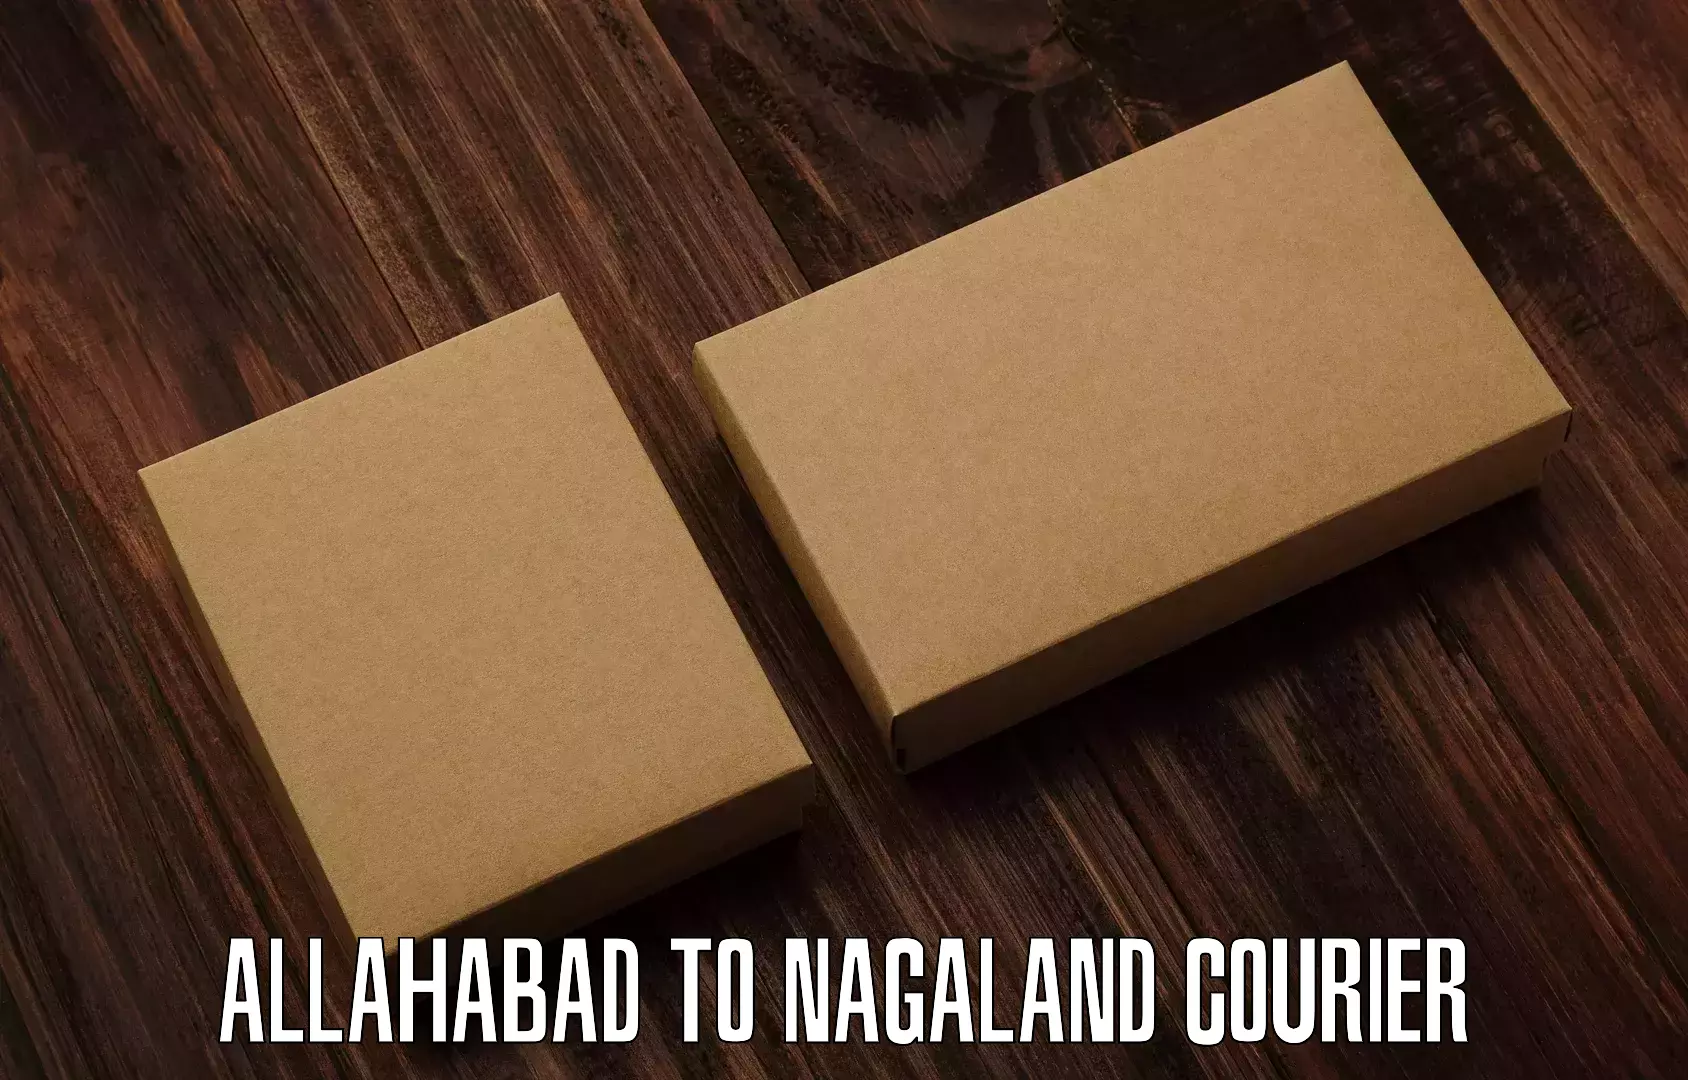 International courier networks Allahabad to Nagaland